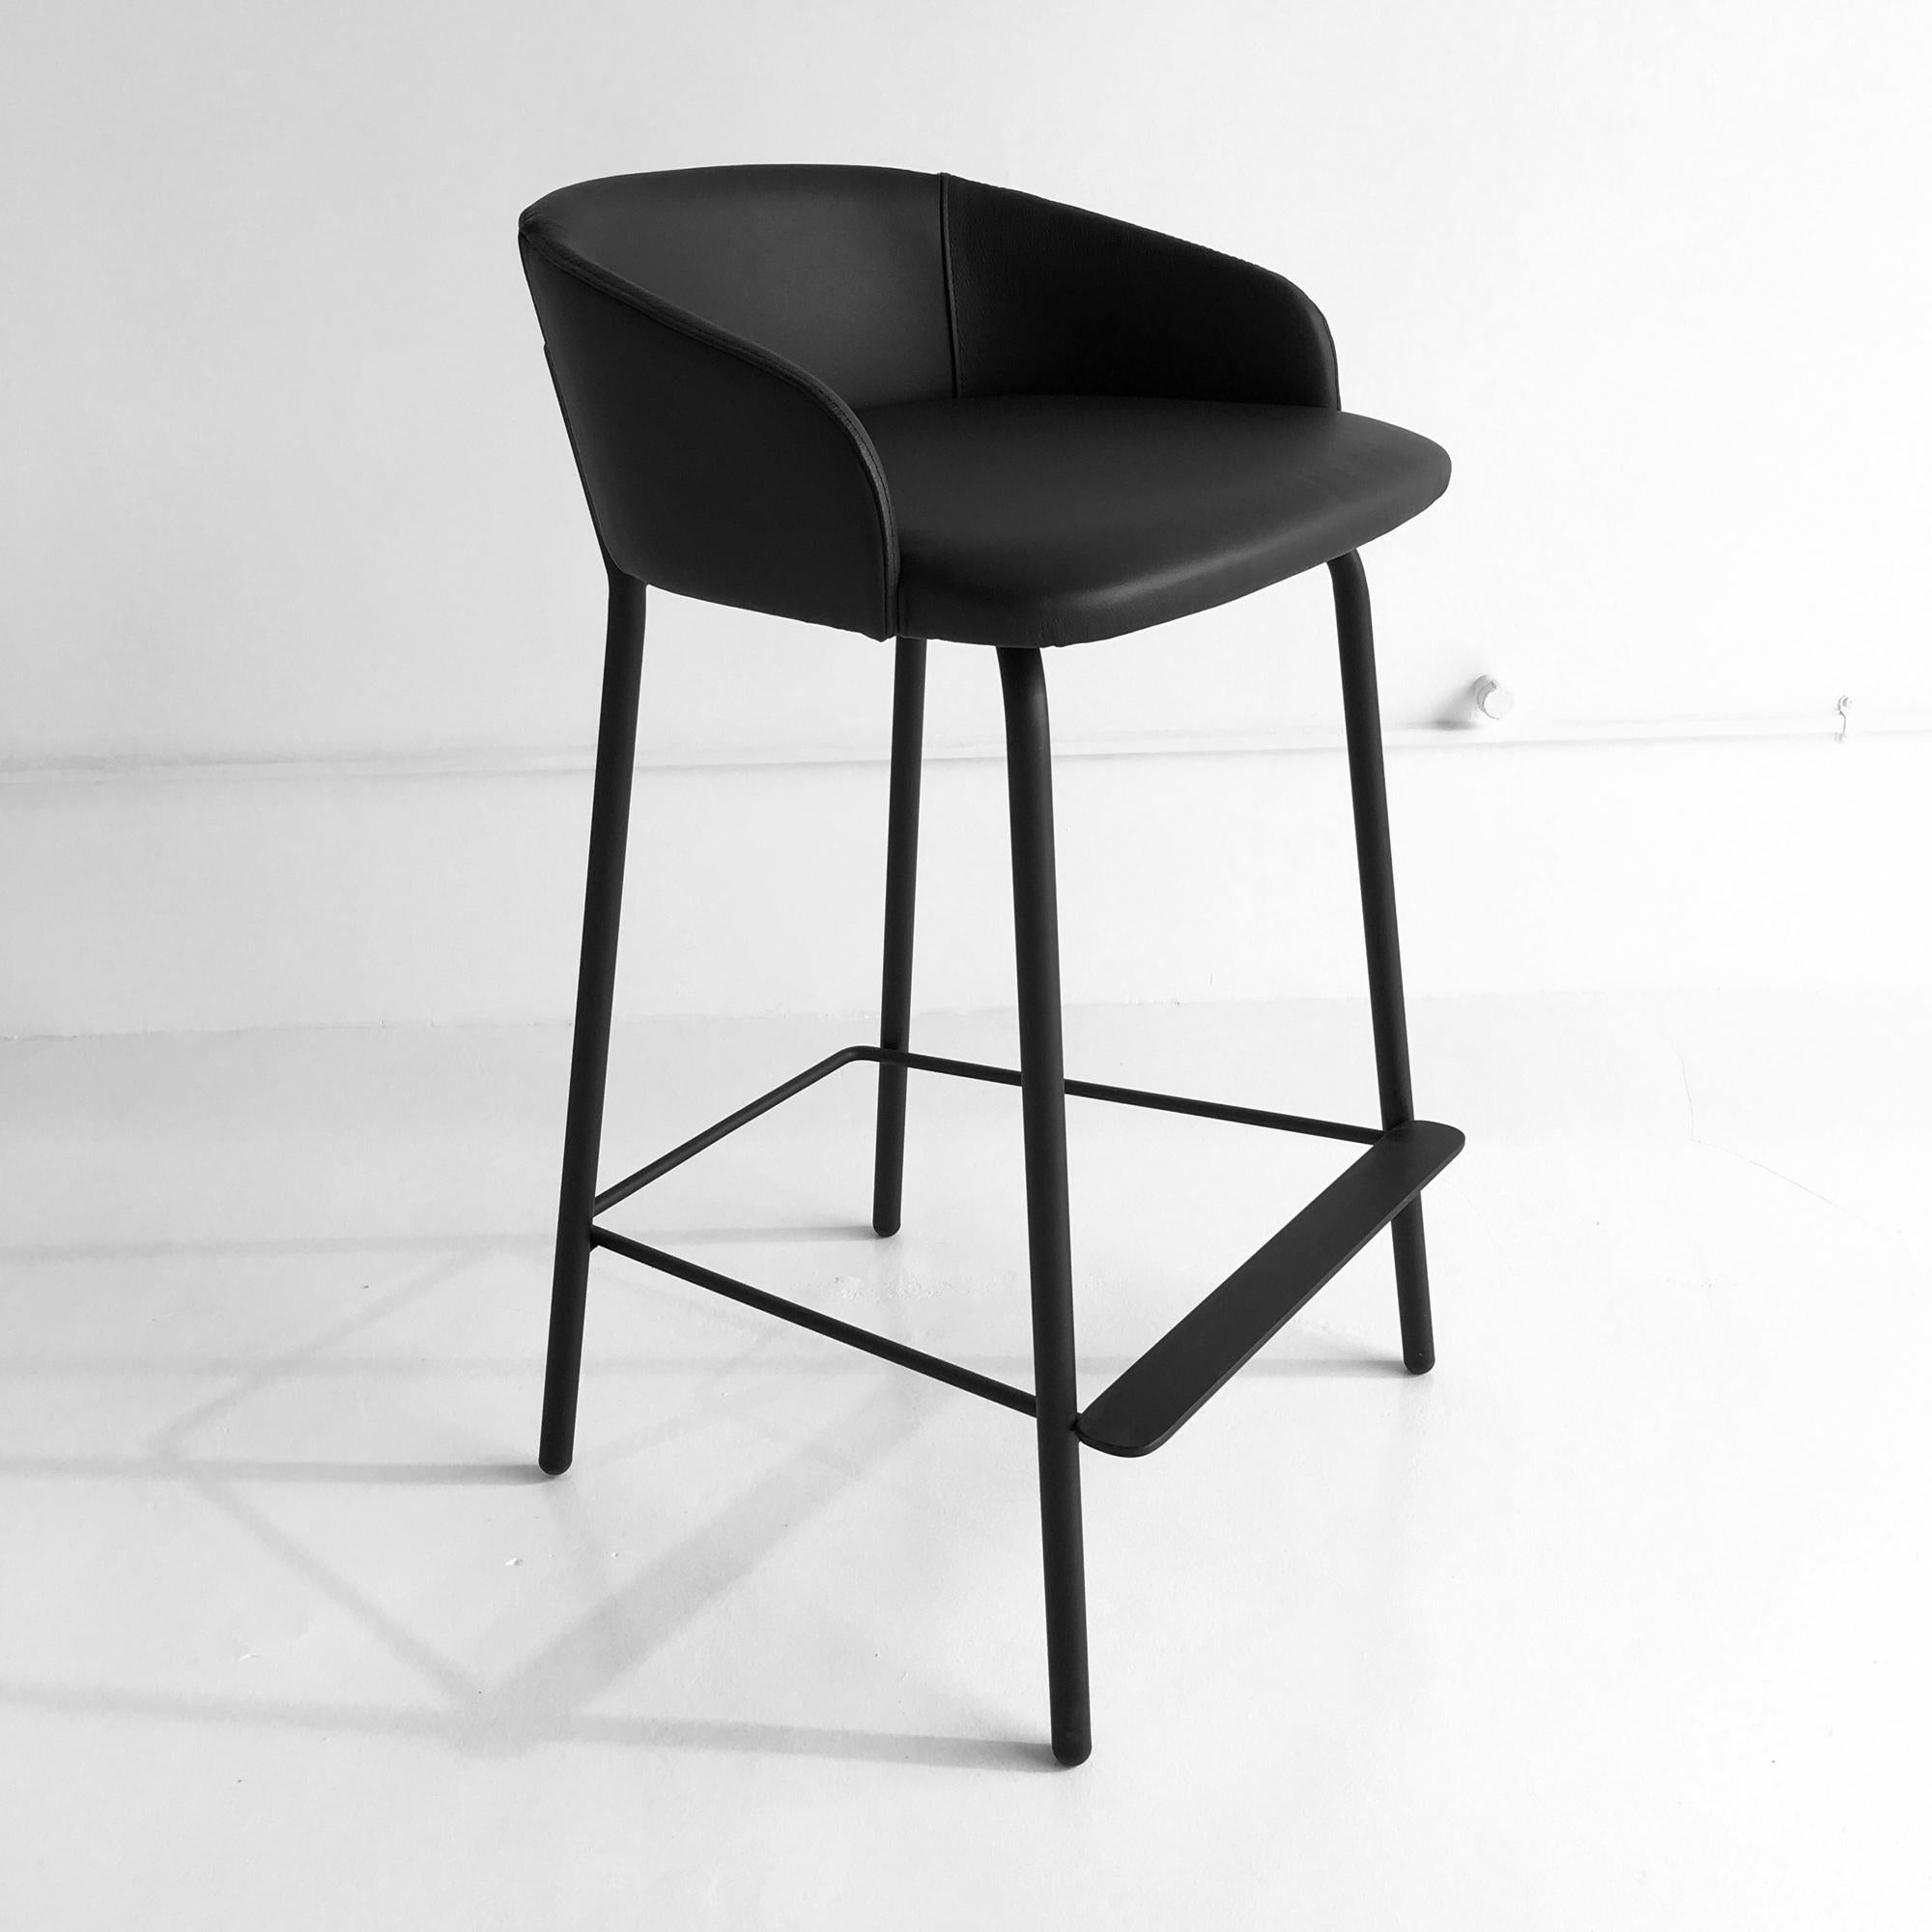 Modern In Stock in Los Angeles, Black Leather Stool by Marco Zito, Made in Italy